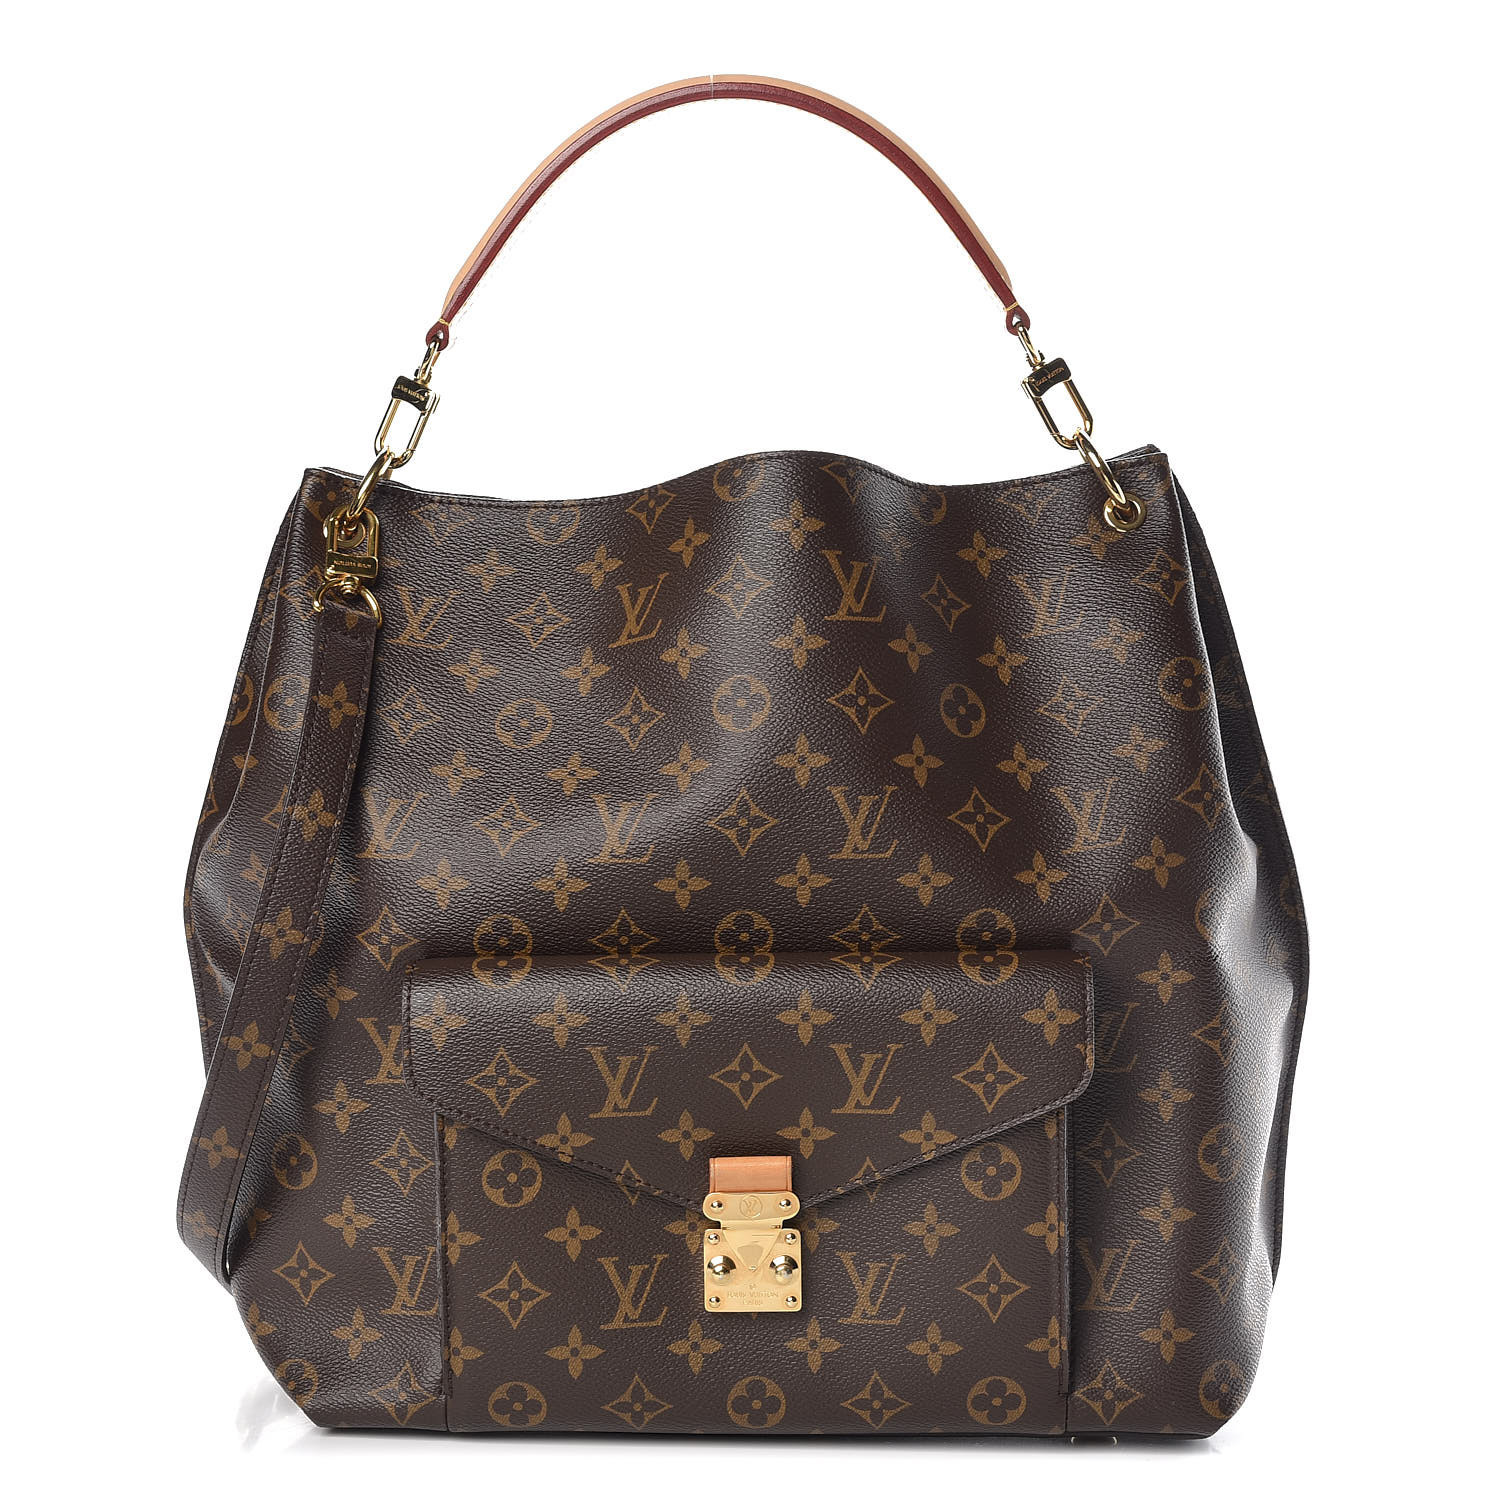 Louis Vuitton handbag purse brand new knock-off - clothing & accessories -  by owner - apparel sale - craigslist